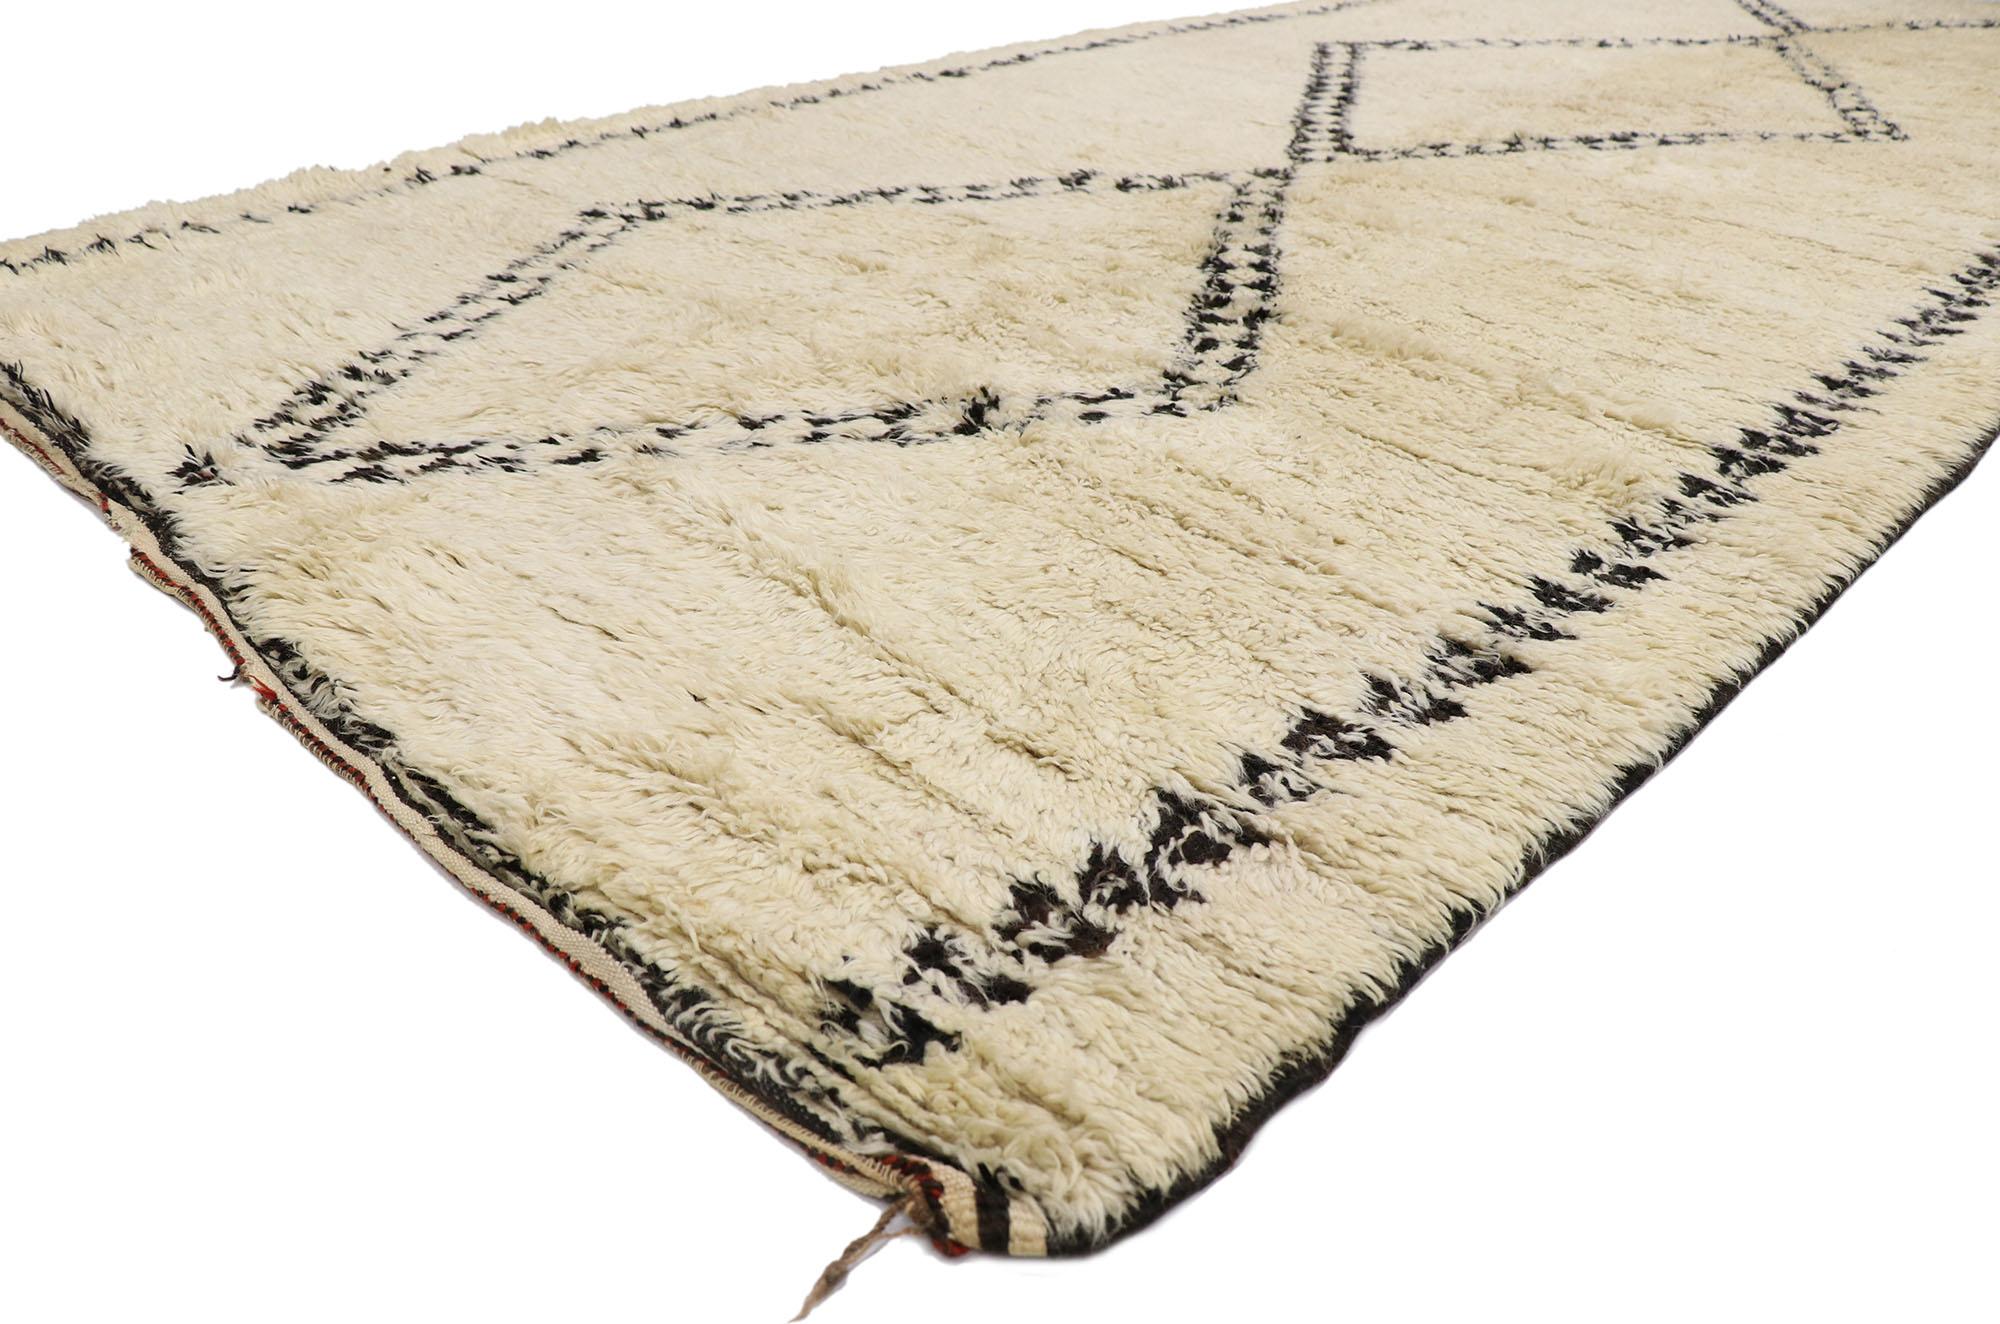 21387 vintage Berber Beni Ourain Moroccan rug with Mid-Century Modern style 06'08 x 14'00. Rendered in variegated shades of beige, black, coffee, and brown with other neutral accent colors. Perfect for a living room, bedroom, dining room, children's